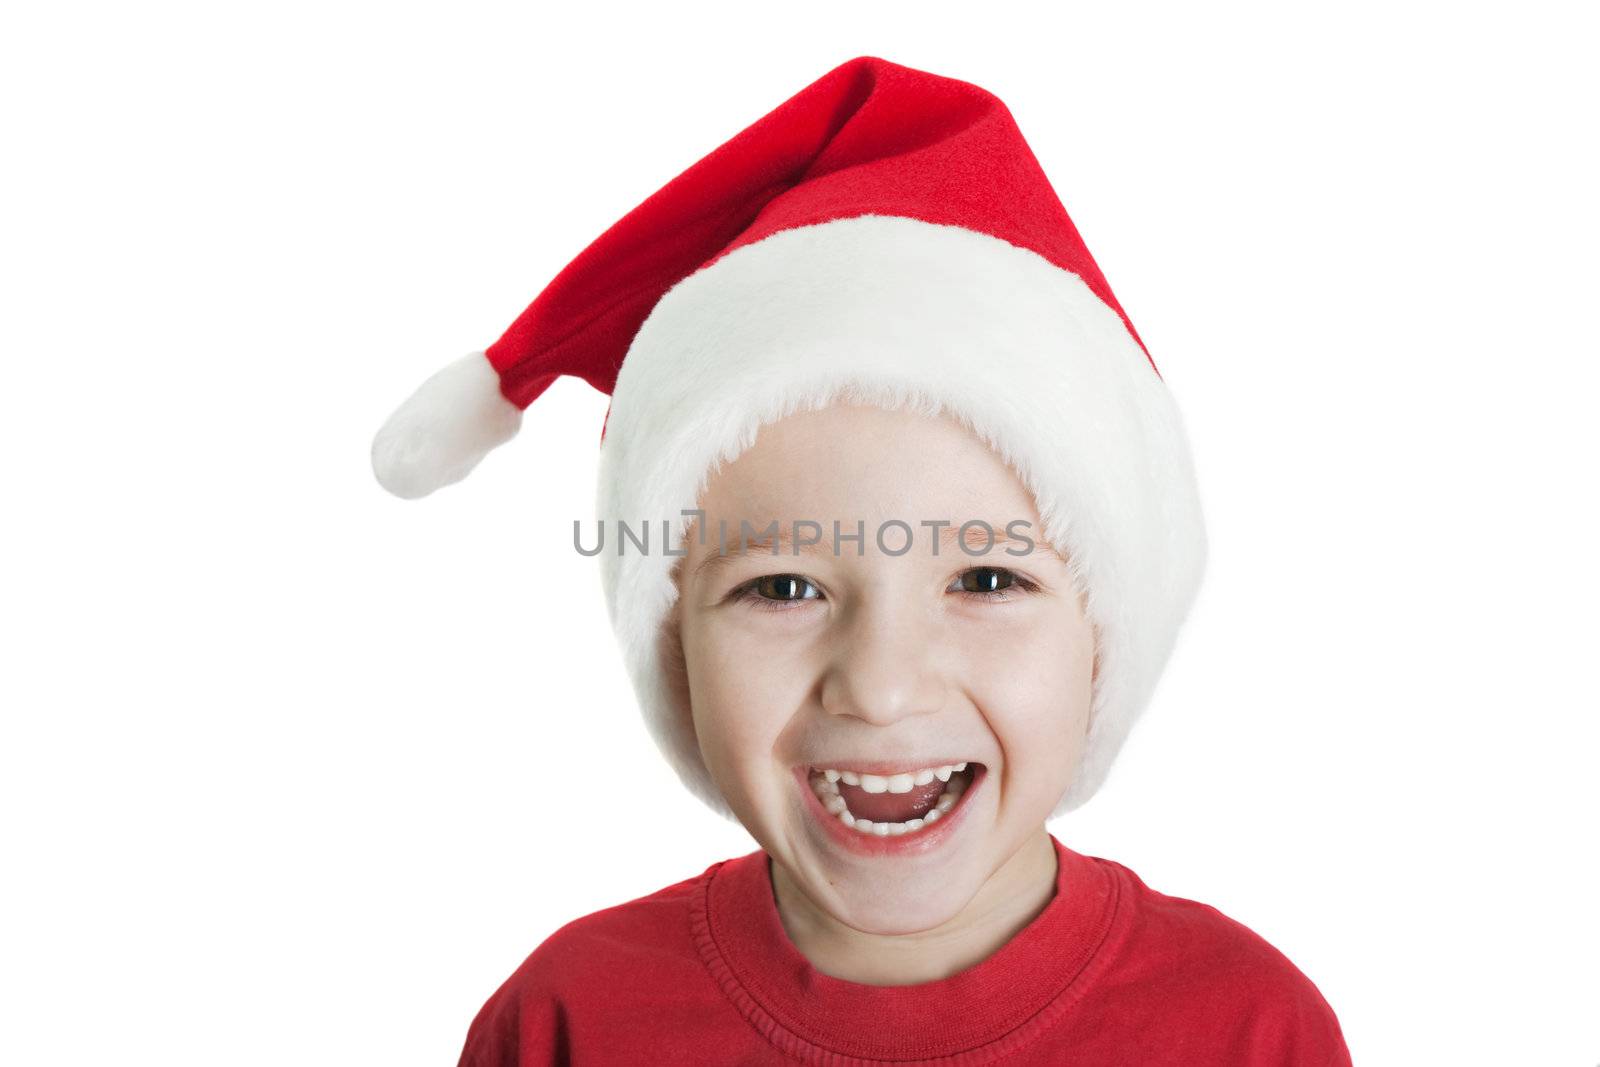 Child in Santa hat by ia_64